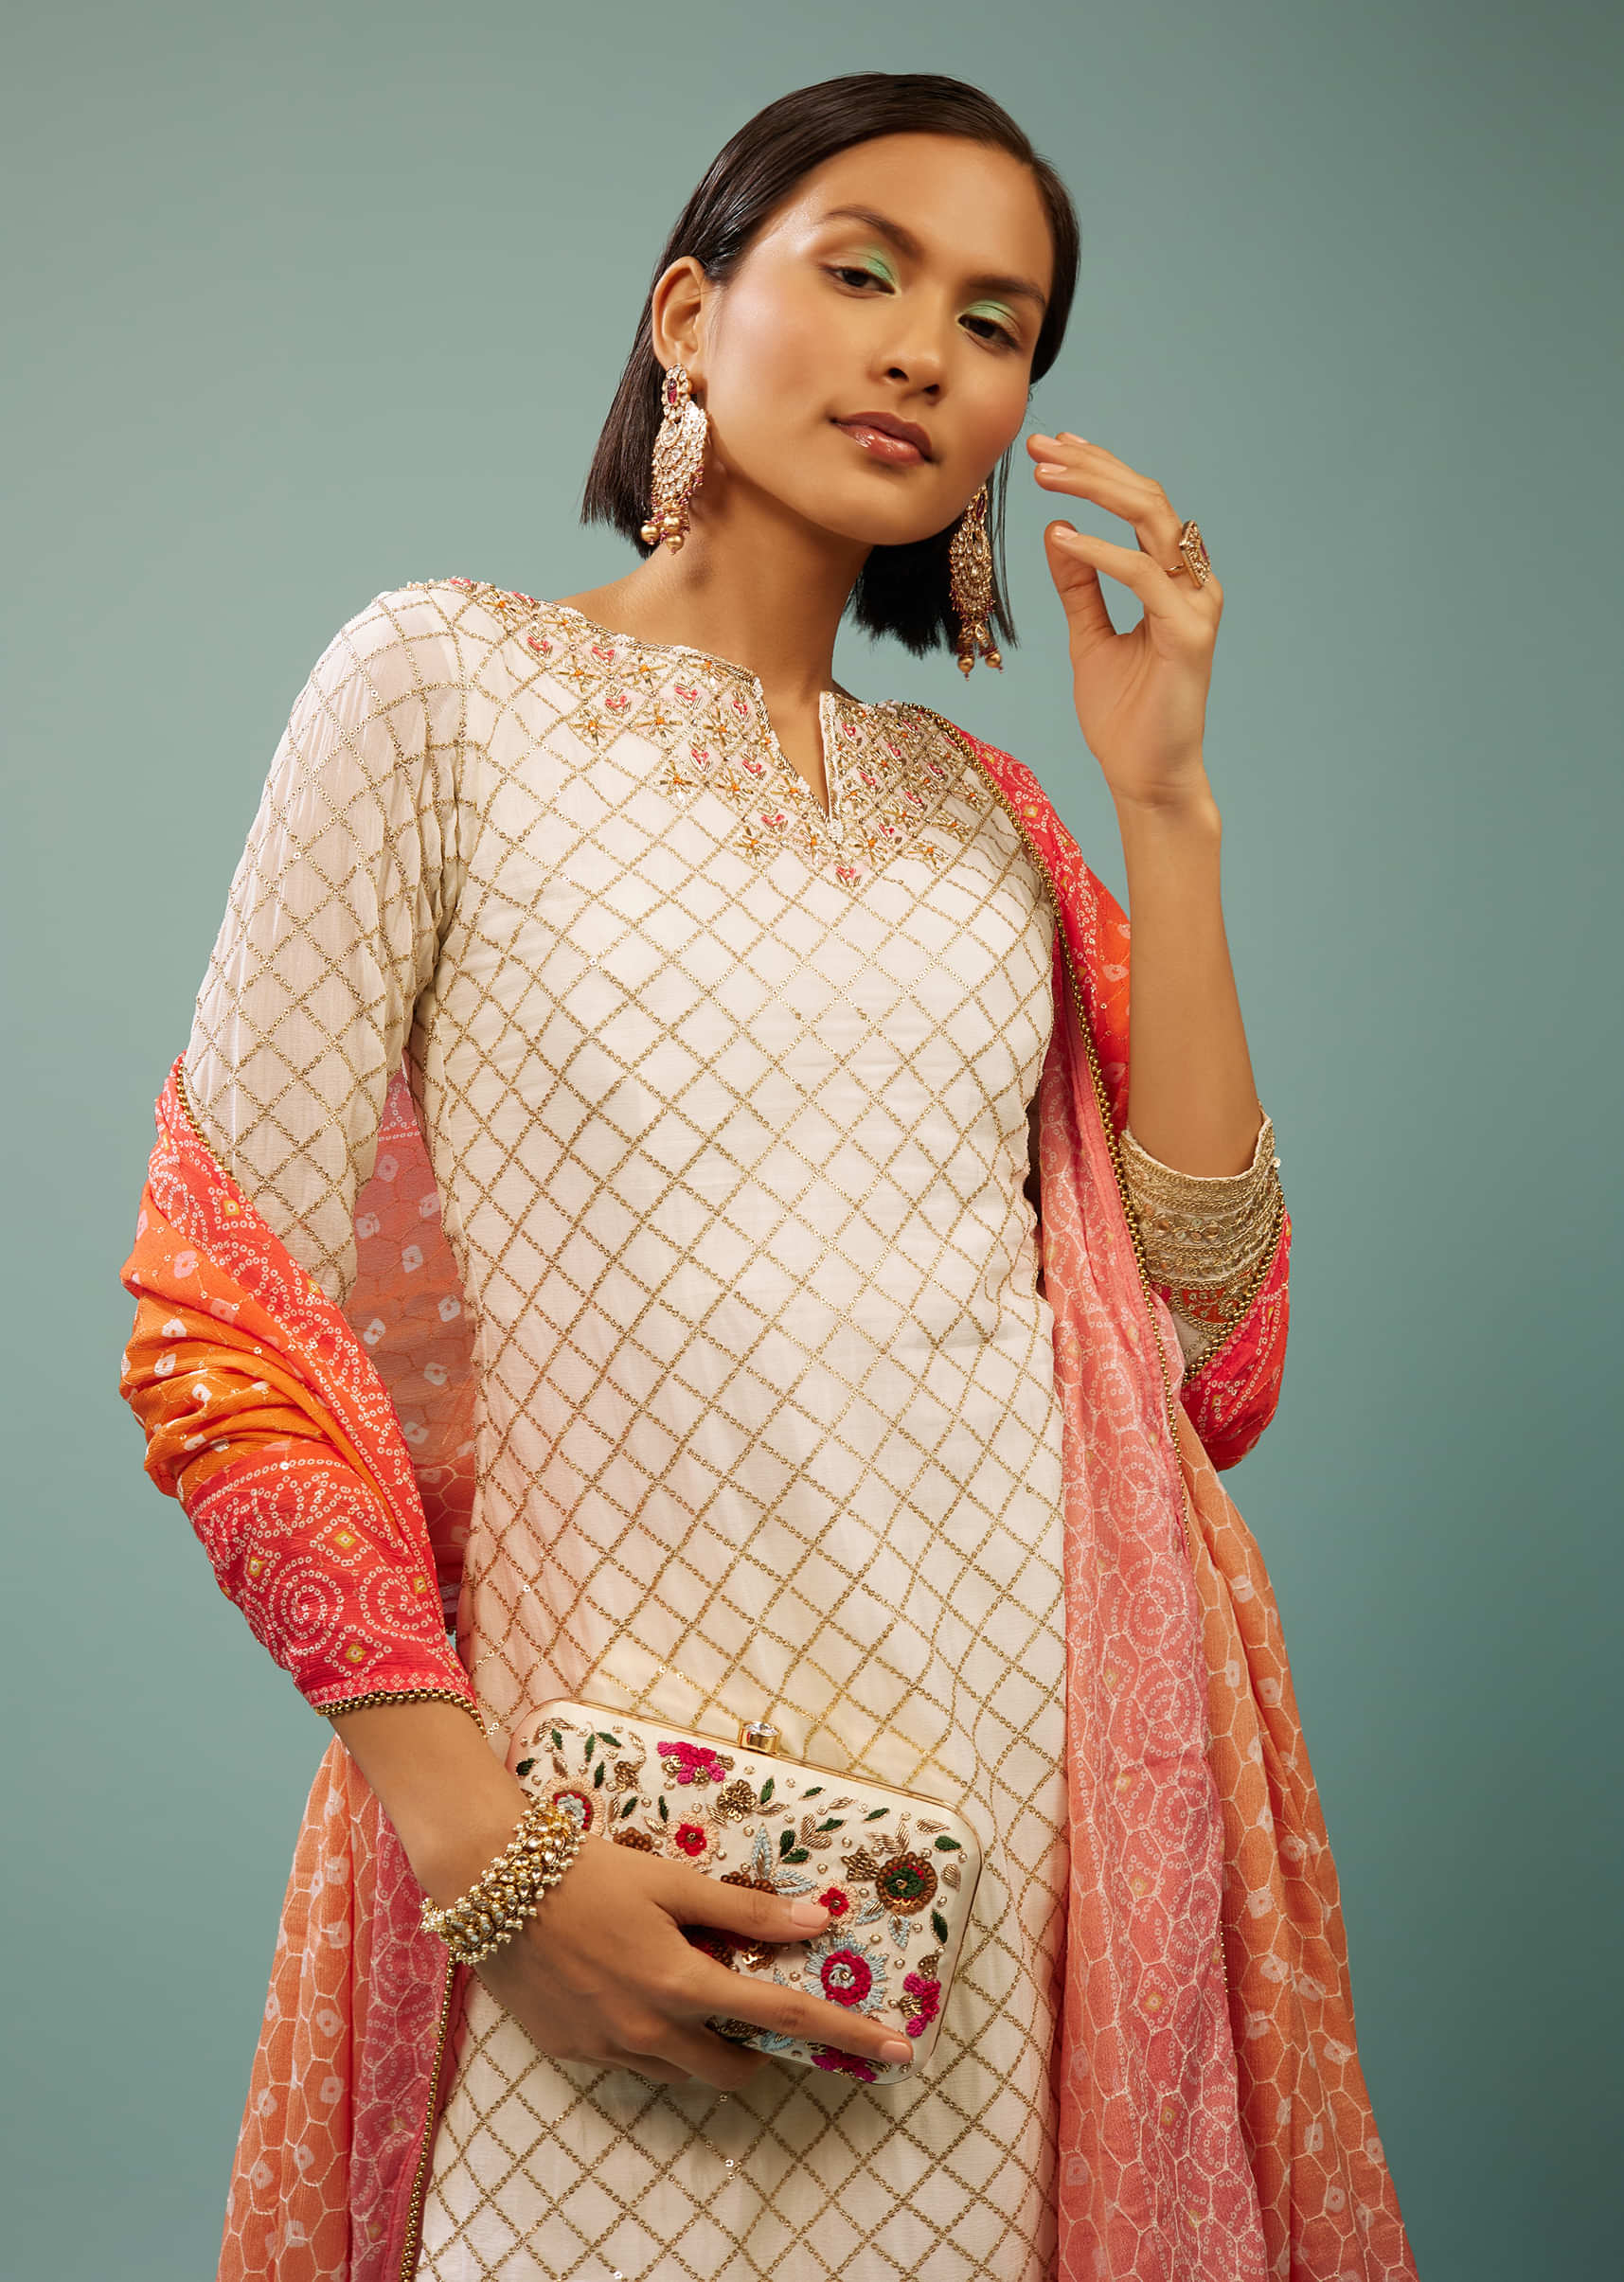 Daisy White Sharara Suit With Embroidery And Bandhani Dupatta